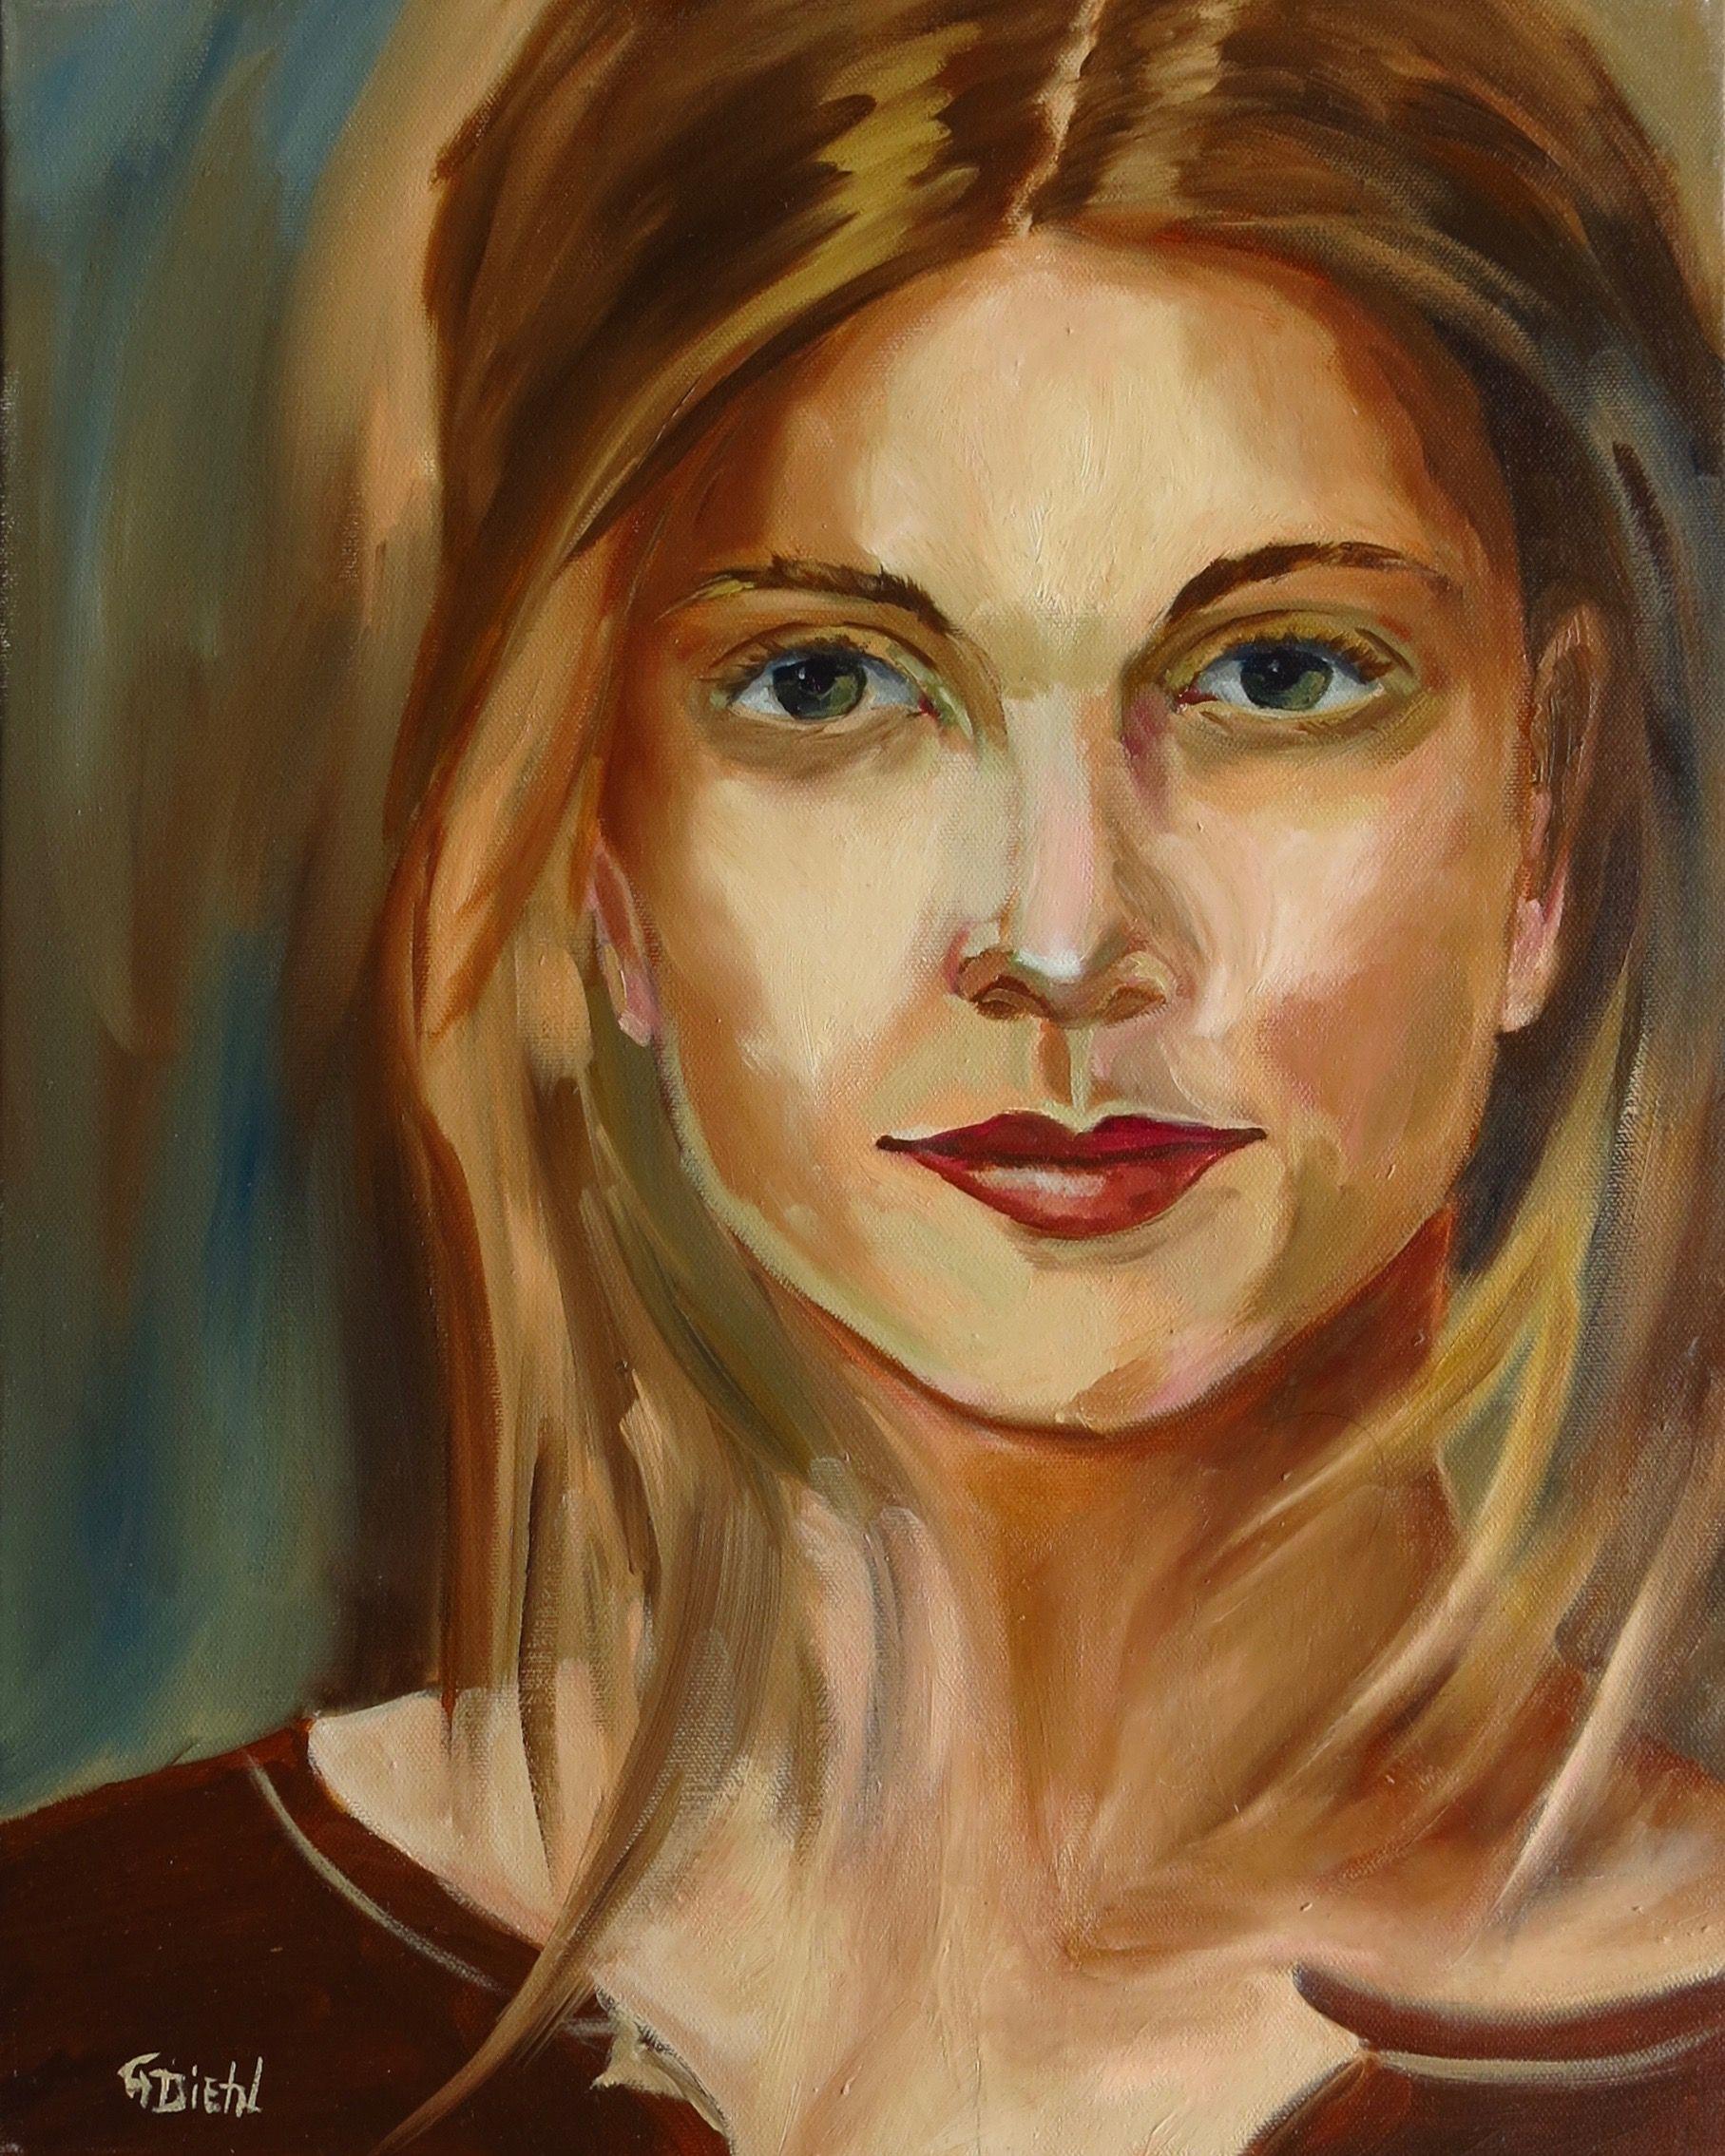 This female portrait has been done in oil paints on a stretched 16"x20" canvas. It is done in the realism style.   If you have any questions or comments, please feel free to ask me. I'm here to help with any fine art decisions you may have. 